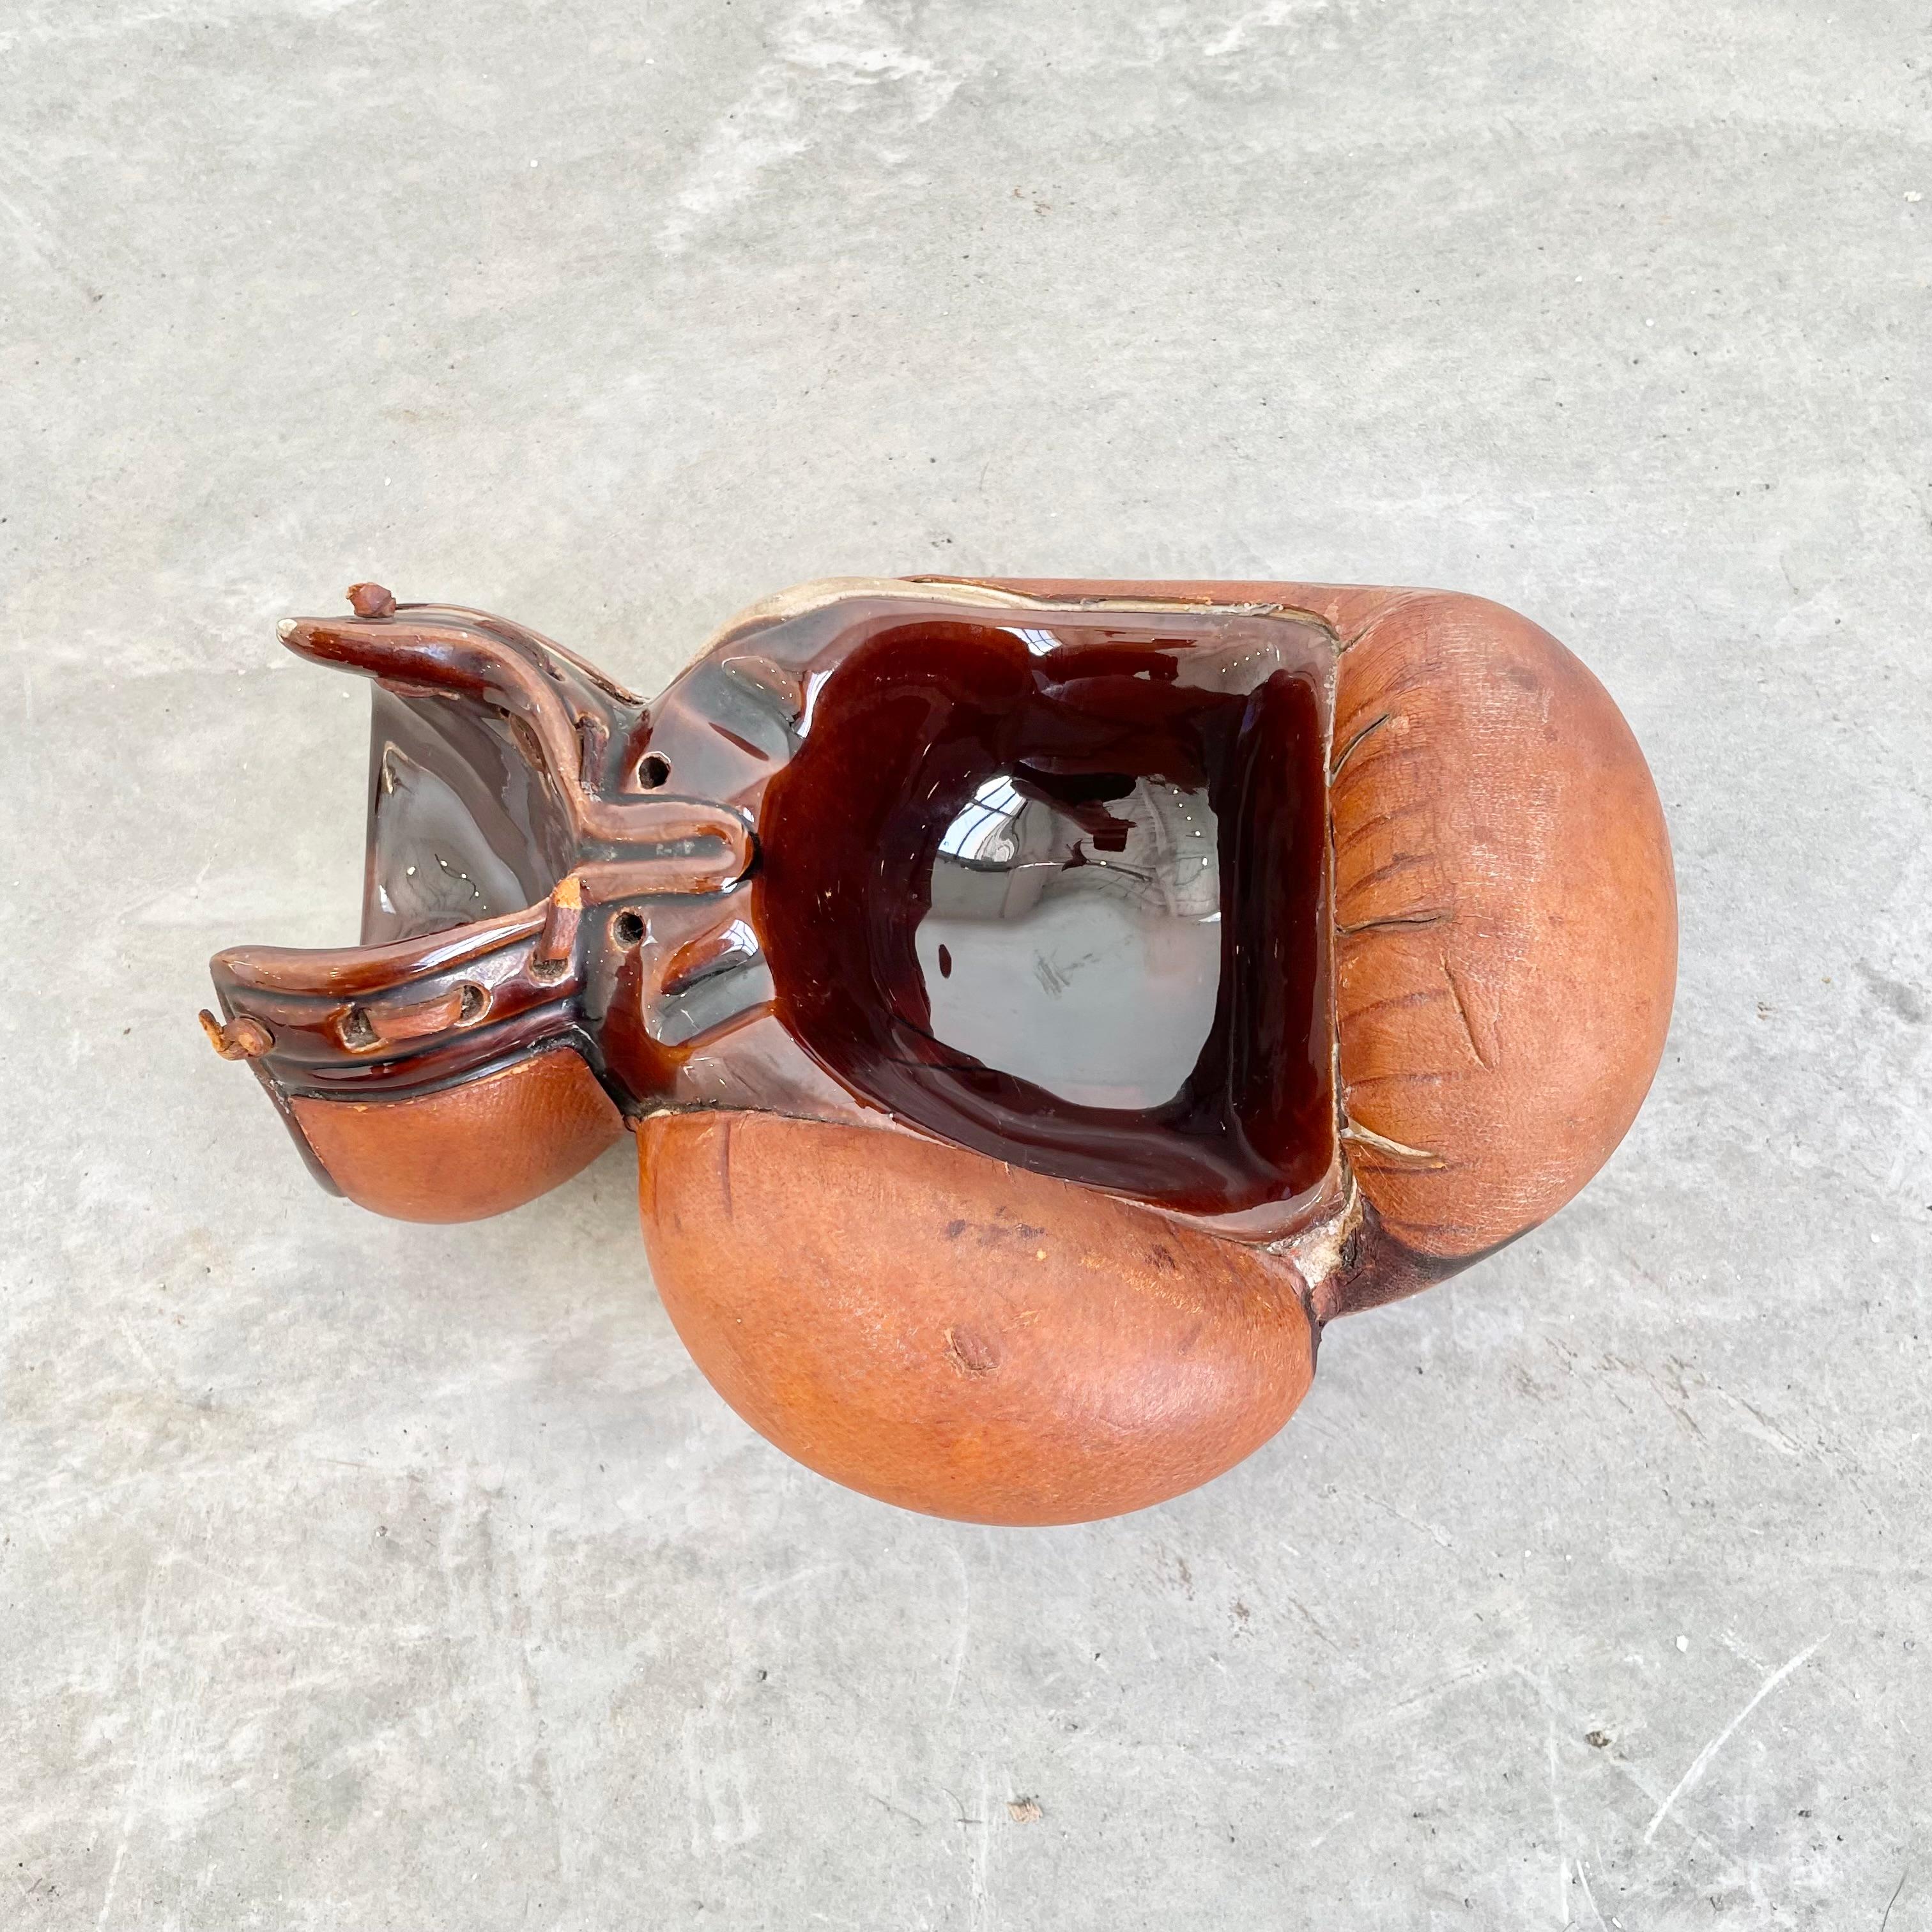 Mid-20th Century Longchamp Leather and Ceramic Boxing Glove Catchall, 1950s France For Sale